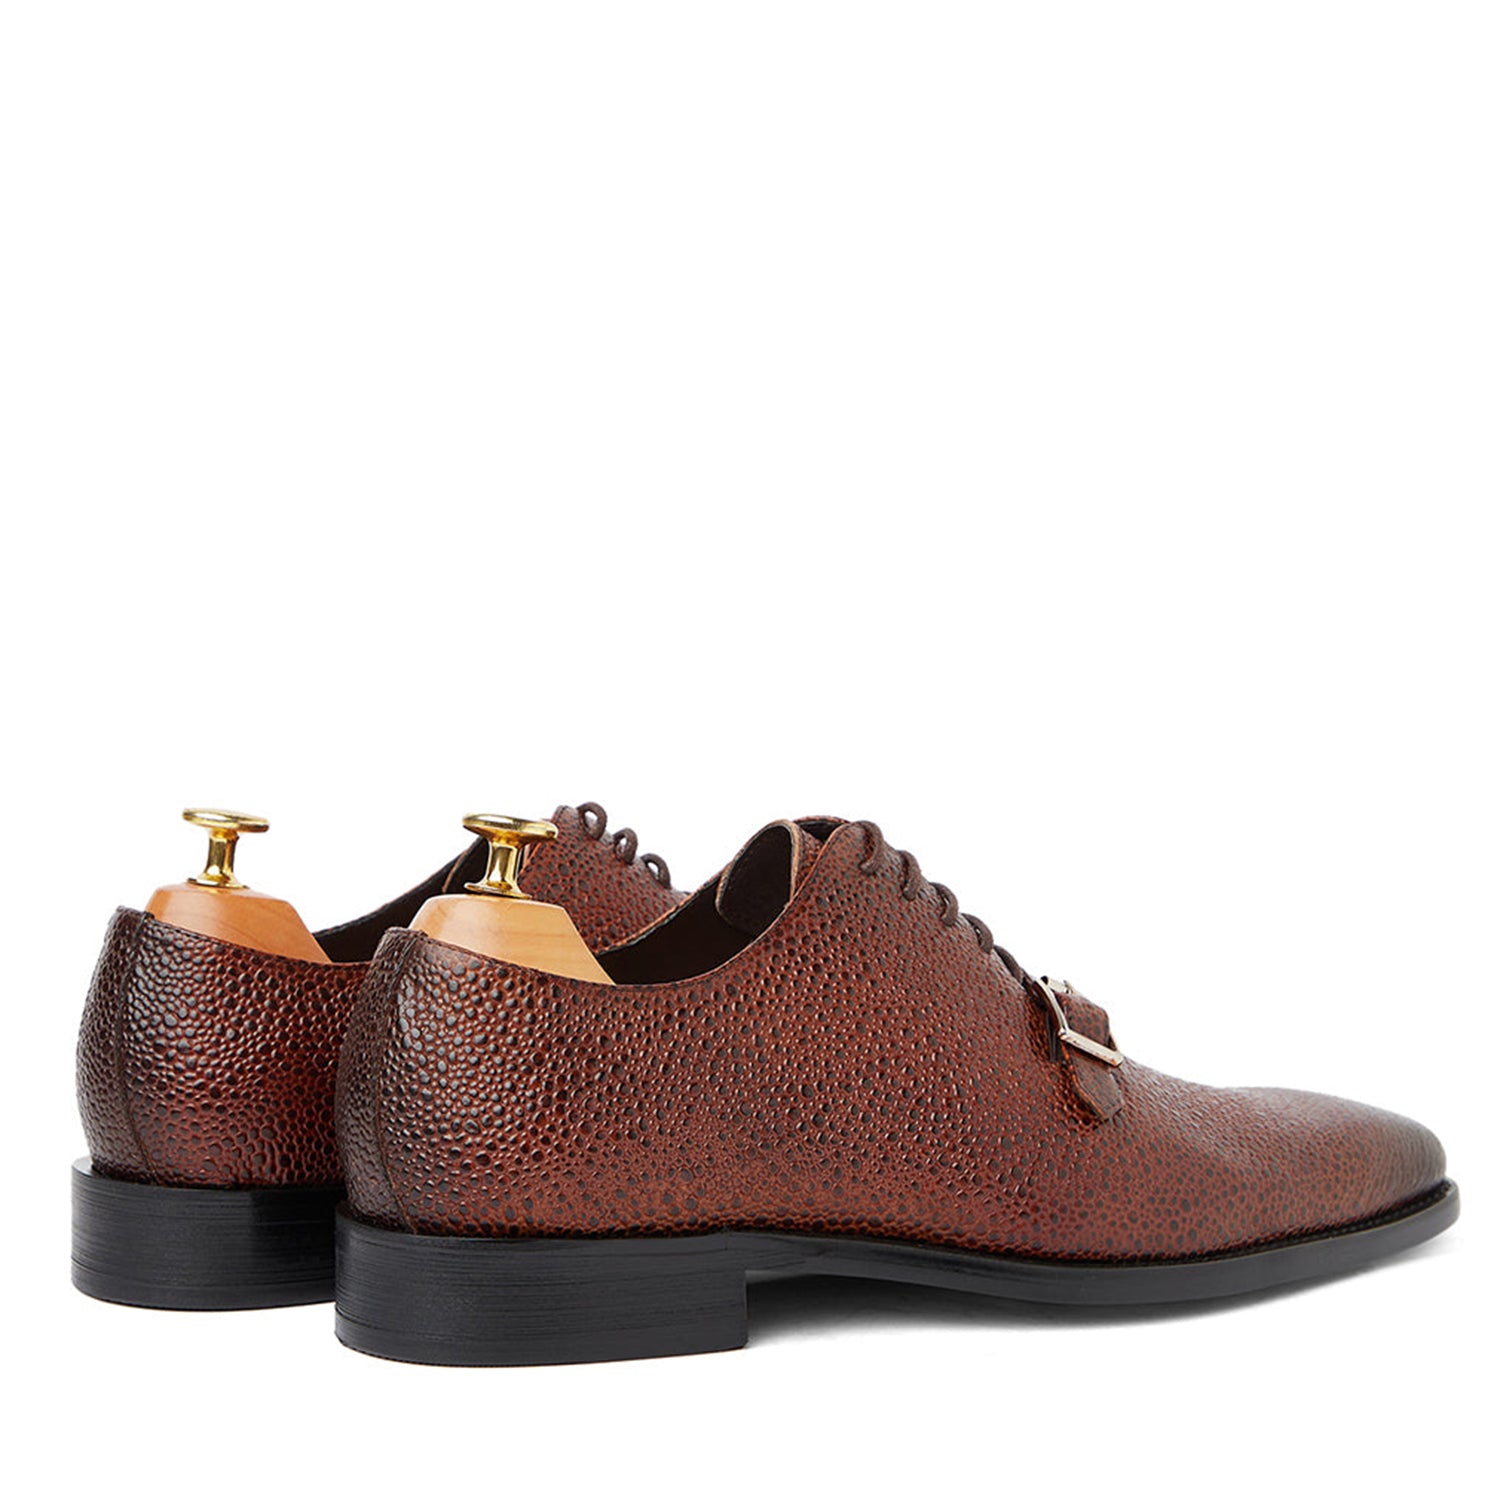 Stingray Leather Oxford Brown Shoes